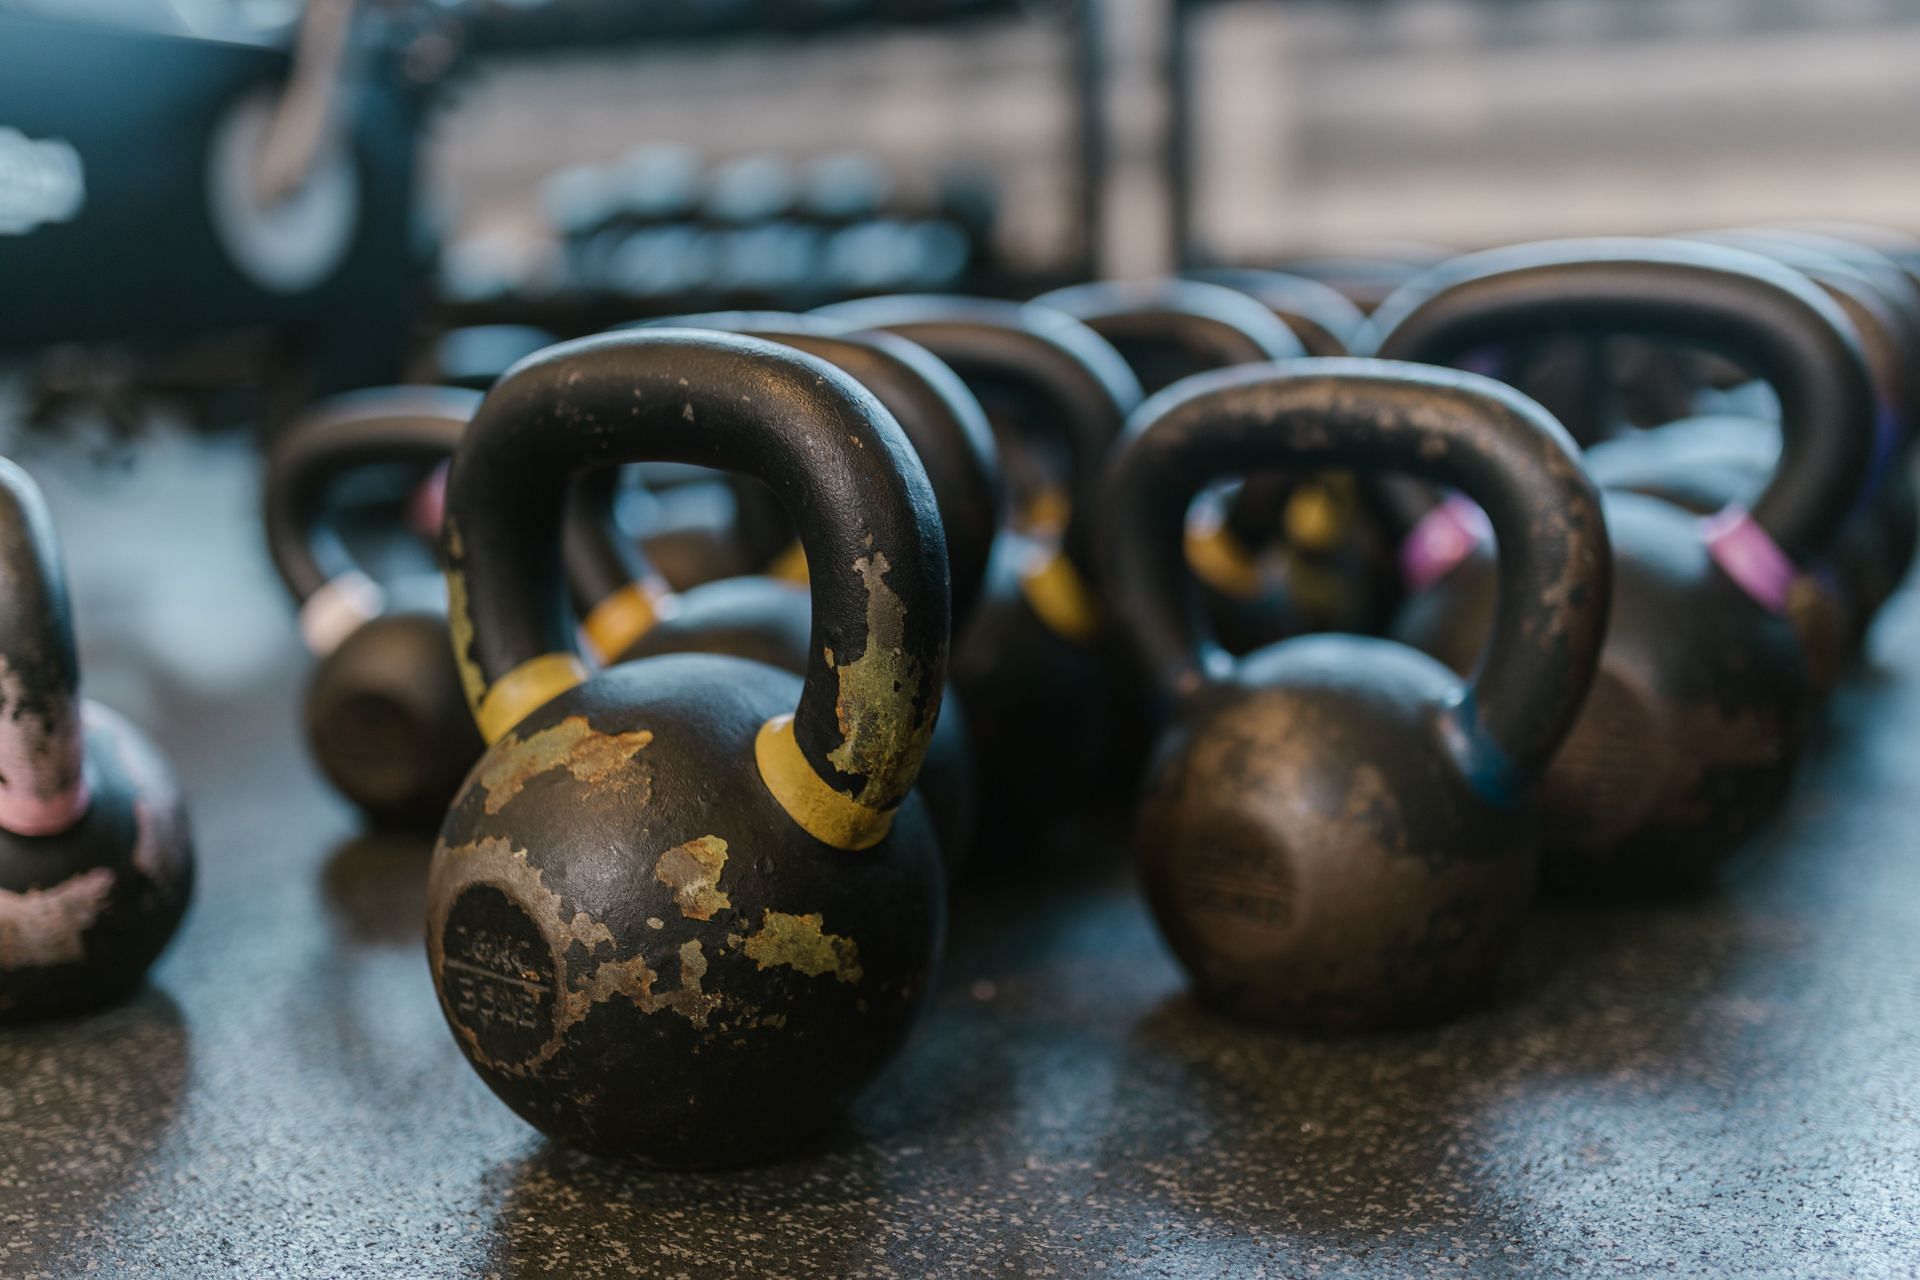 Kettlebells are a unique weightlifting equipment option that are great for building overall strength and power. (Photo by RODNAE Productions/pexels)